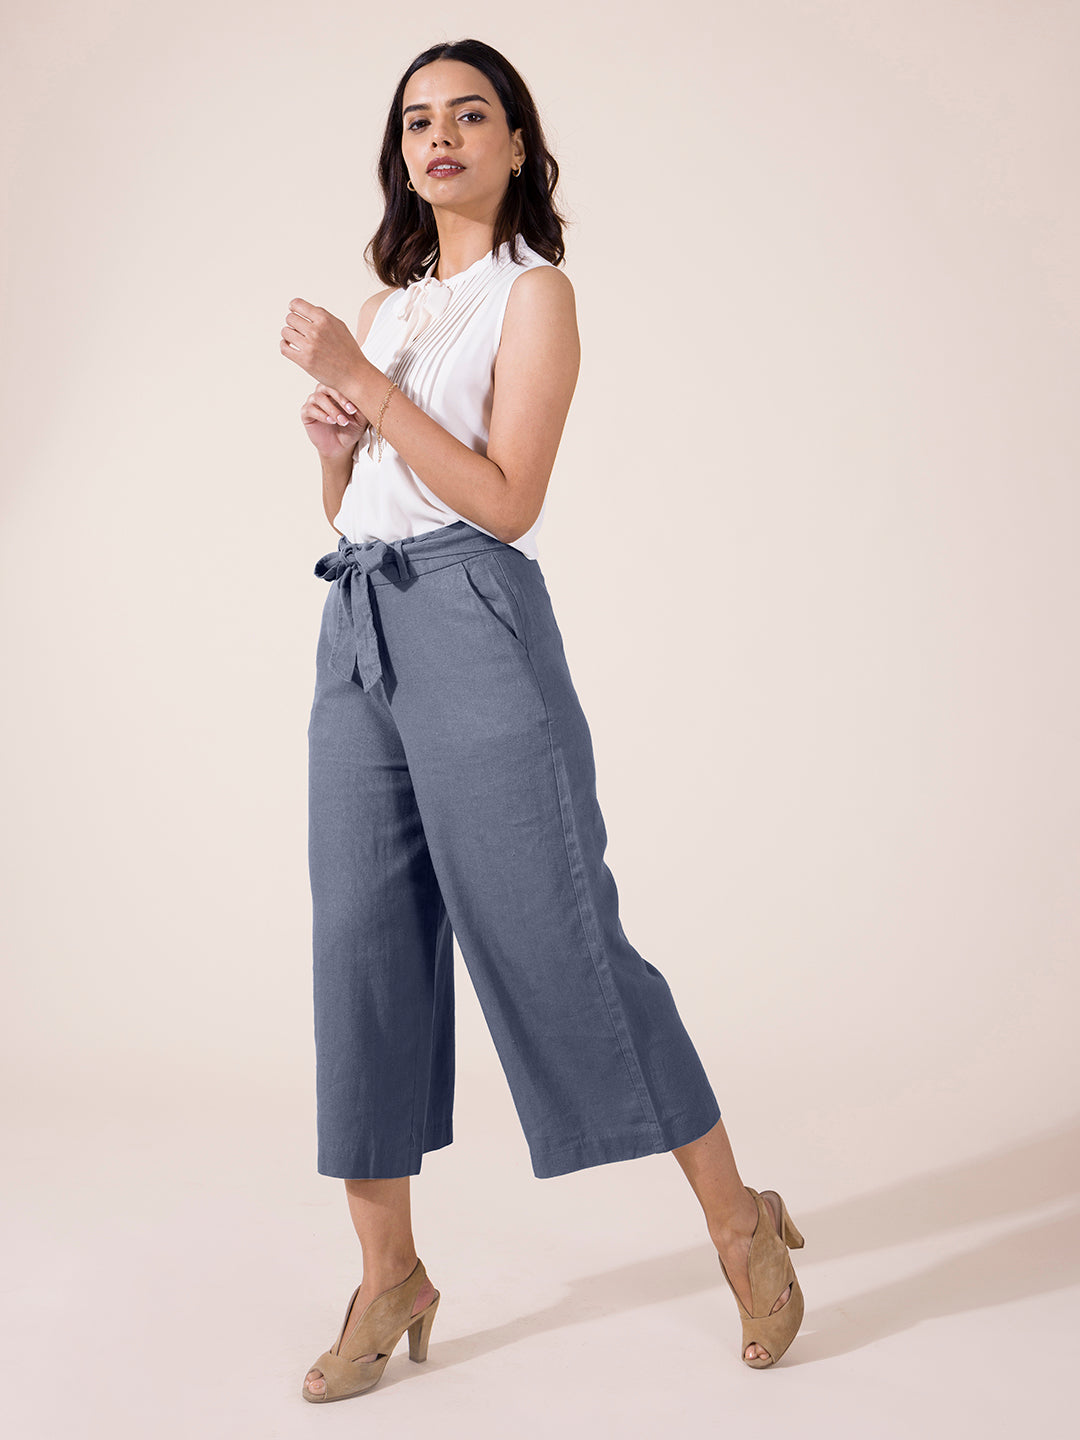 Trying something new: denim culottes with knee high boots